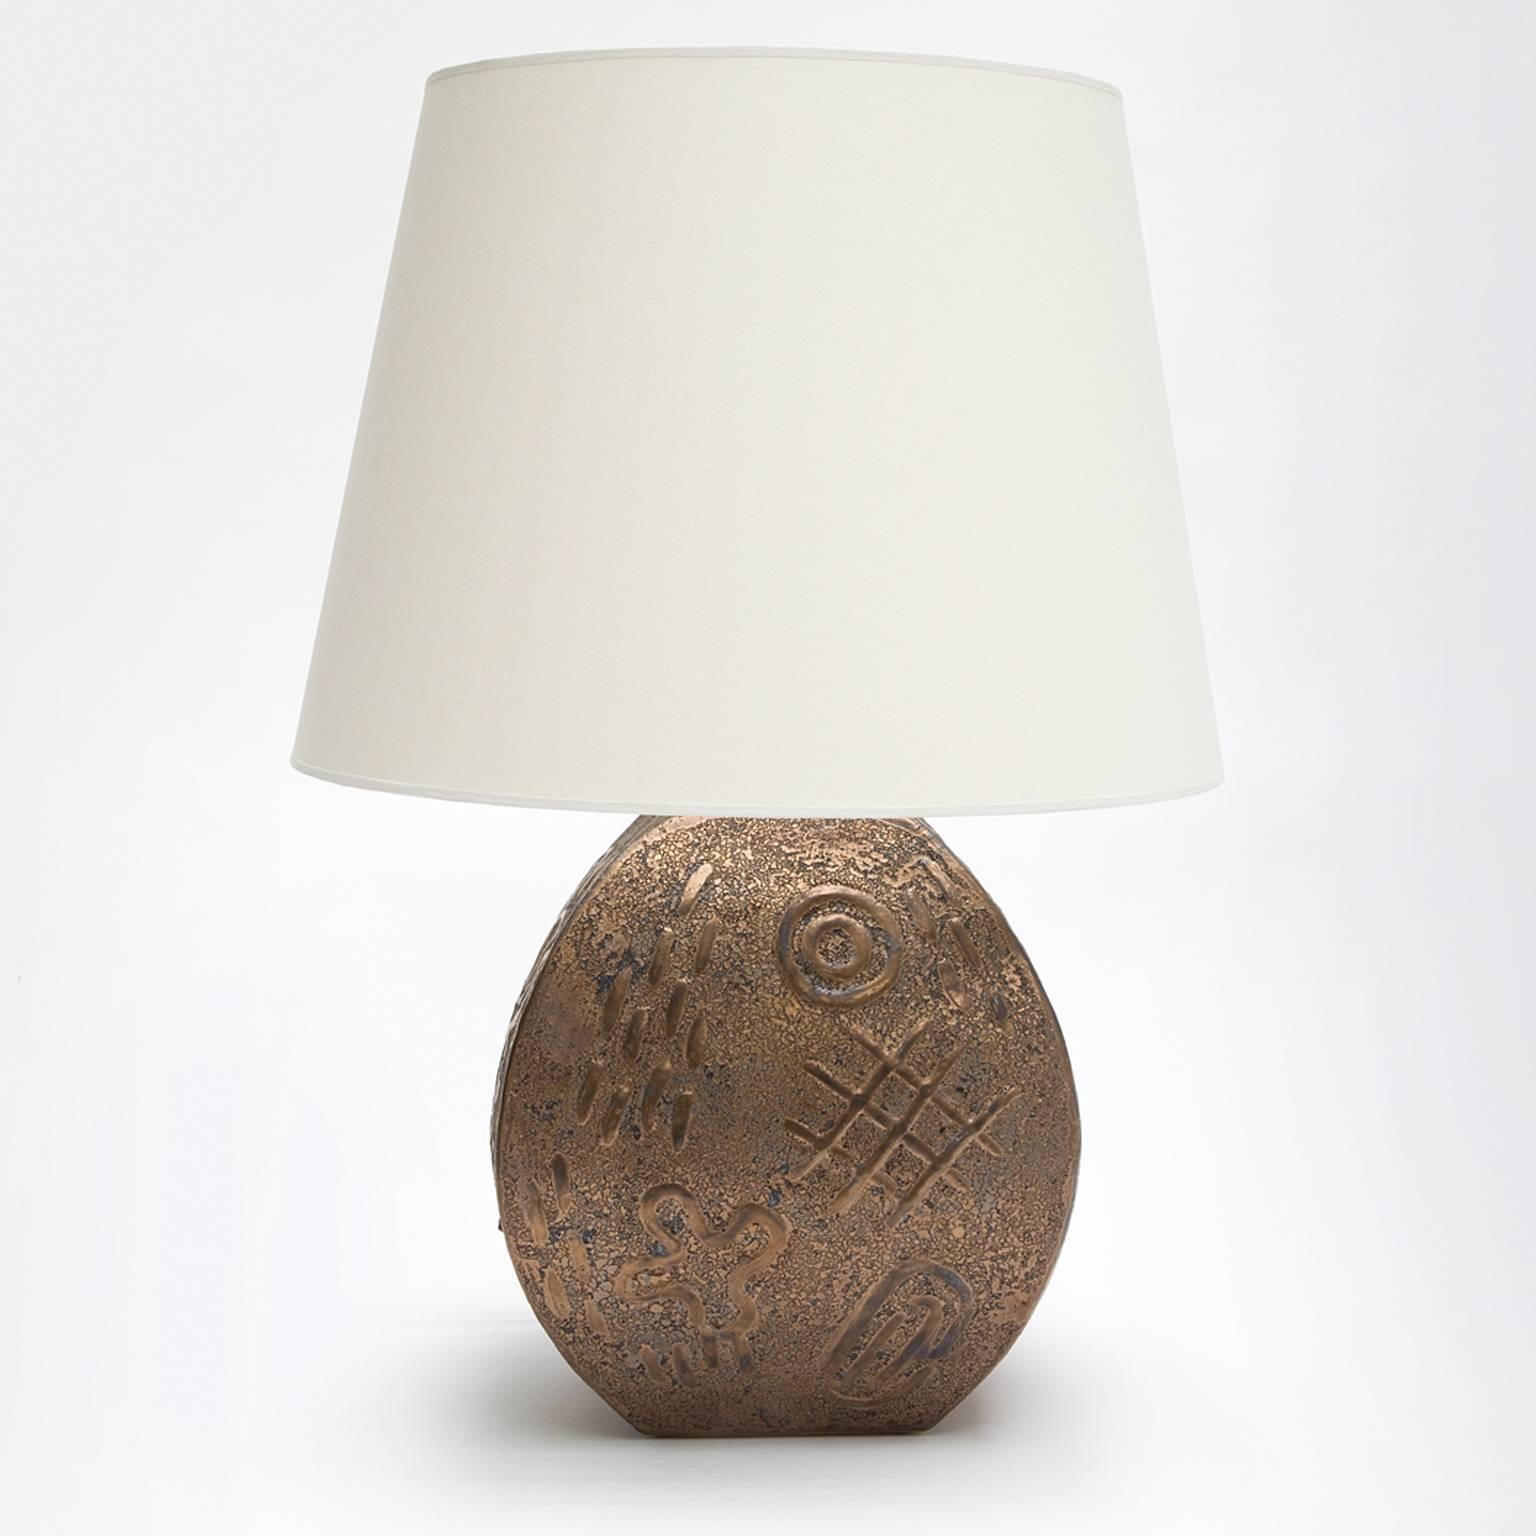 Hieroglyphic bronzed glazed ceramic table lamp.
Unique.
Ceramic.
Industrial hand built.
Made in New York City.
Available at trans-LUXE.
Measurements: OAH 2'-0" F.
Table Lamp Base: 11" H x 9" W .
Depth 18" W.
Lampshade: